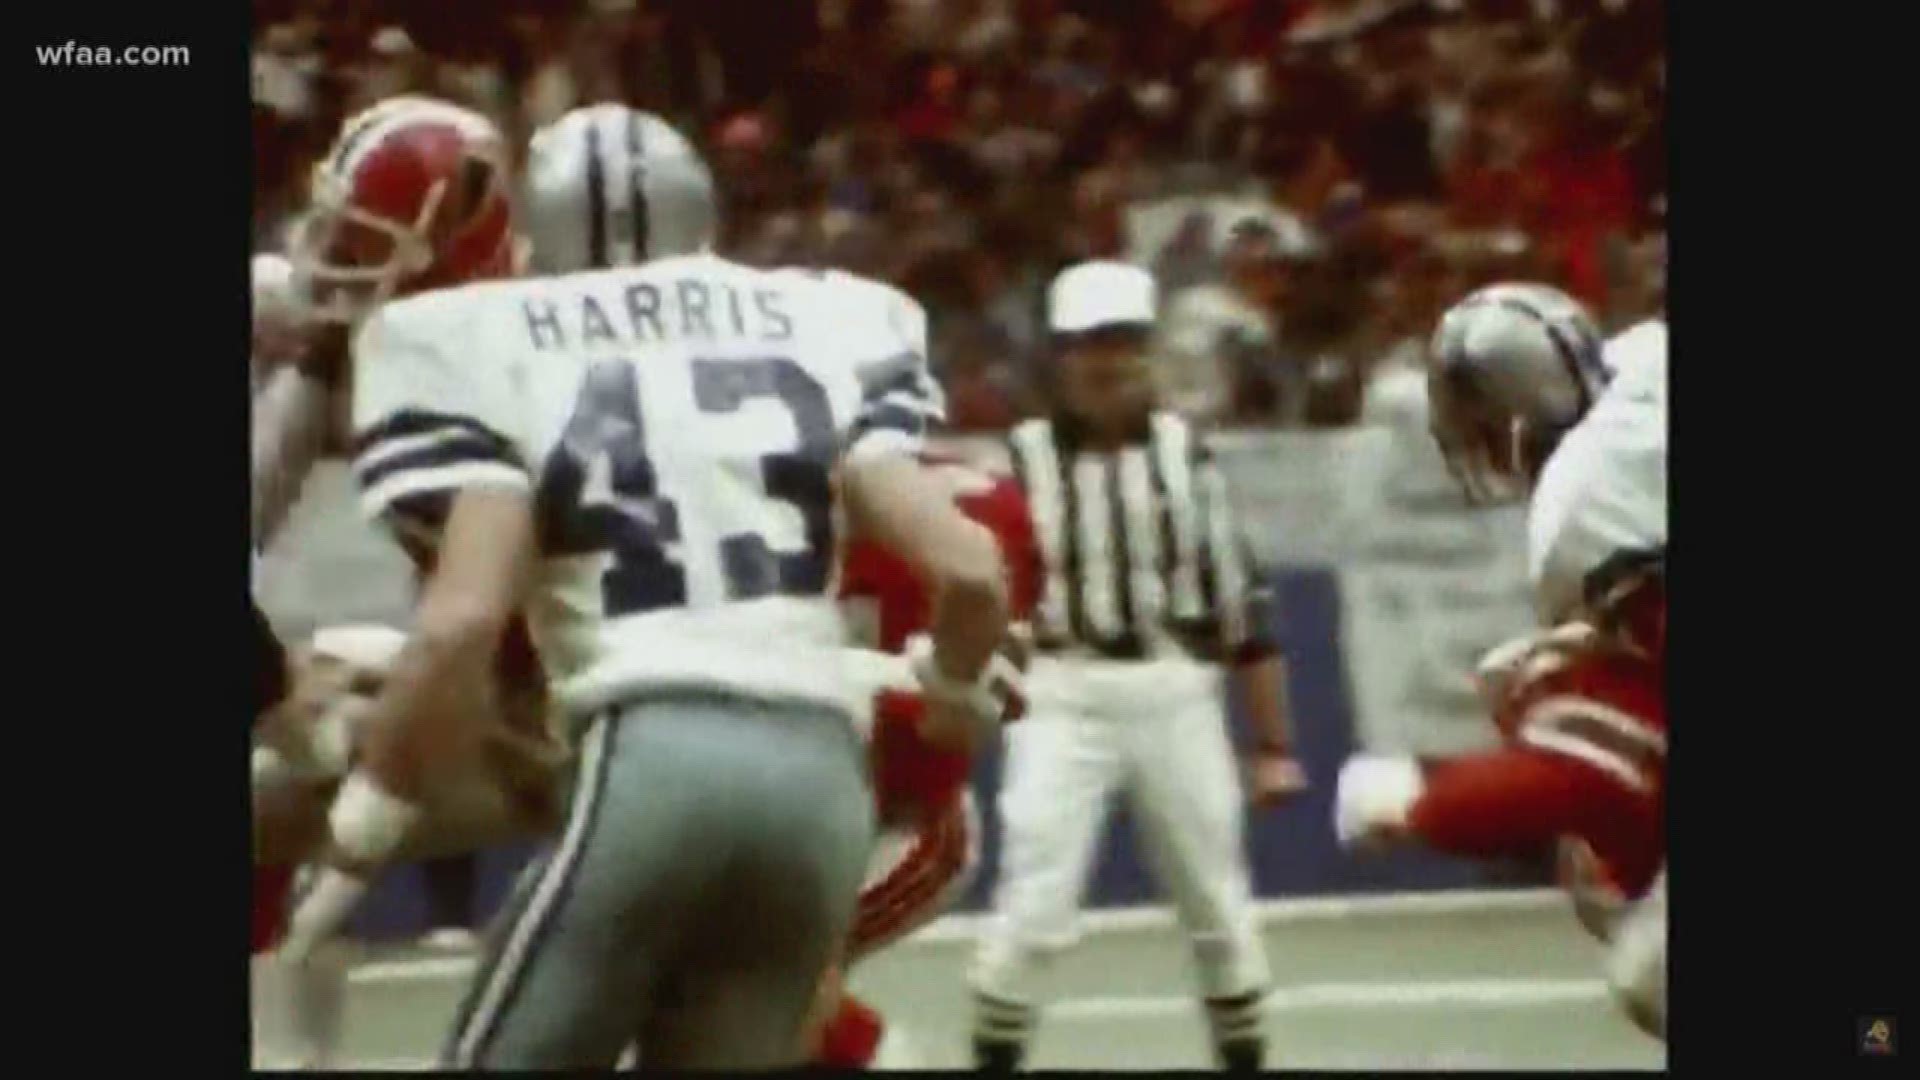 Legendary Dallas Cowboys safety Cliff Harris will join the Pro Football Hall of Fame. But Harris' former Cowboys teammate Drew Pearson never got the call Wednesday.